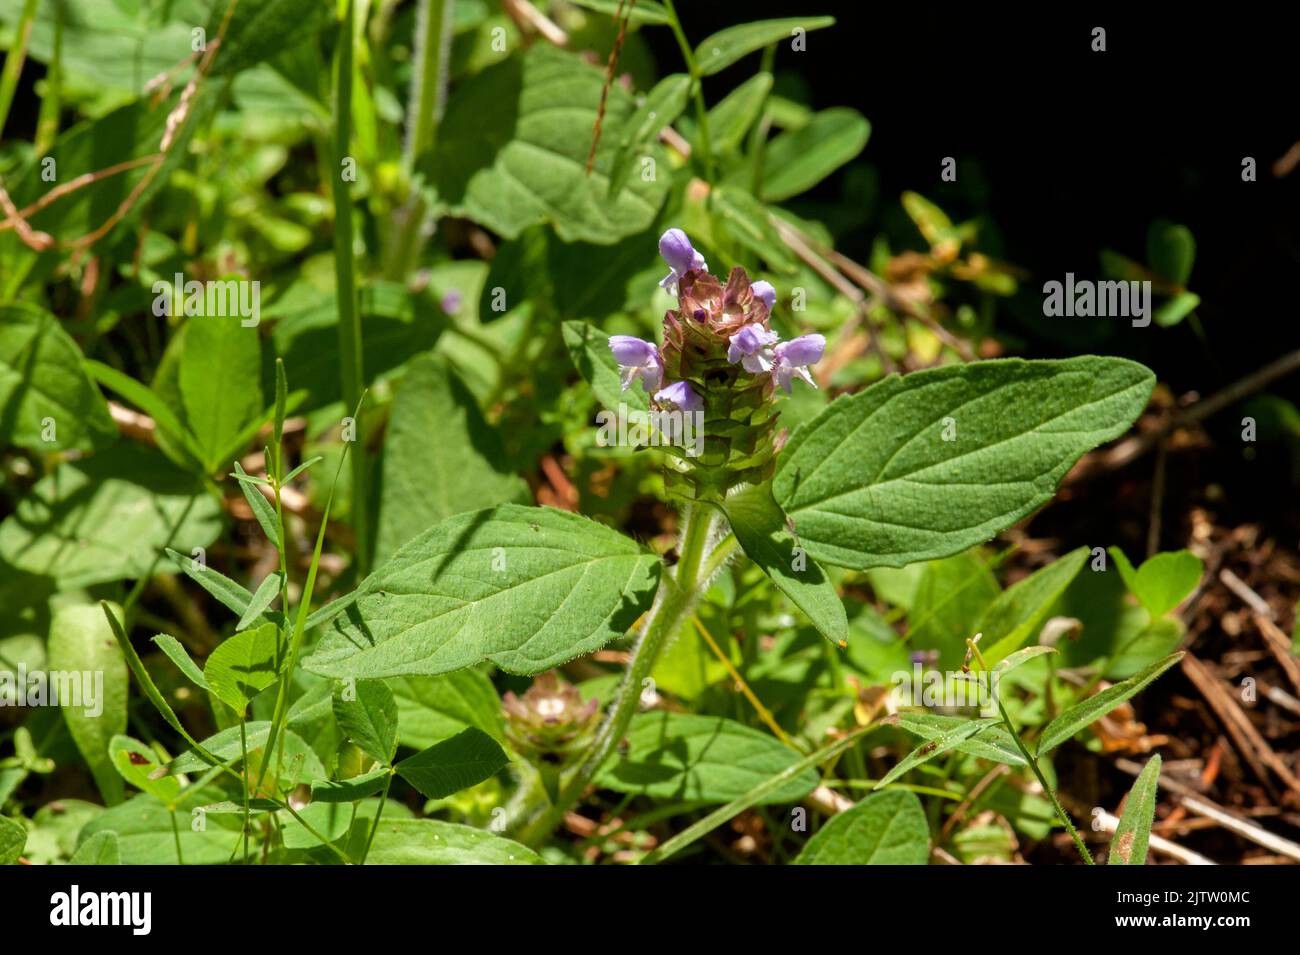 Common Self-Heal (Prunella vulgaris) aka heal-all, woundwort, heart-of-the-earth, carpenter's herb, brownwort and blue curls Stock Photo